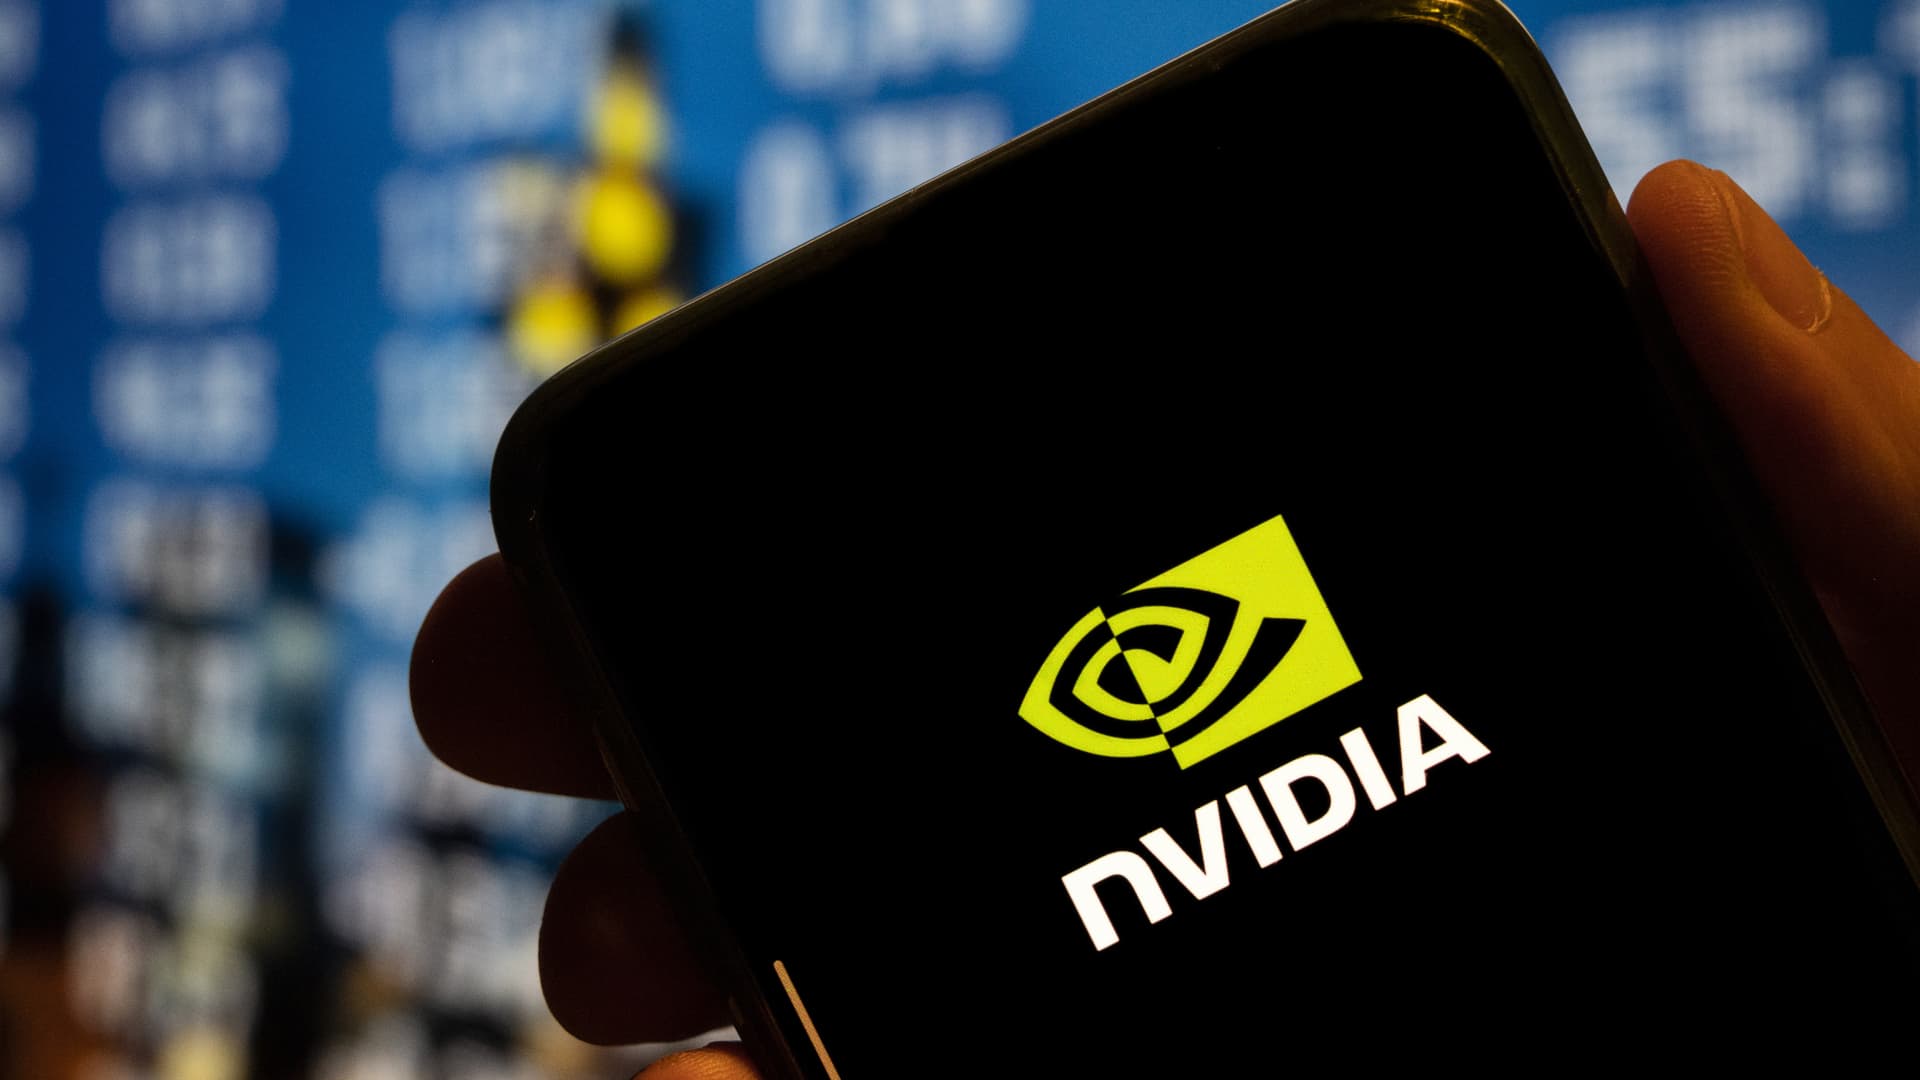 Stocks making the biggest moves midday: Nvidia, Monolithic Power Systems, Ralph Lauren and more